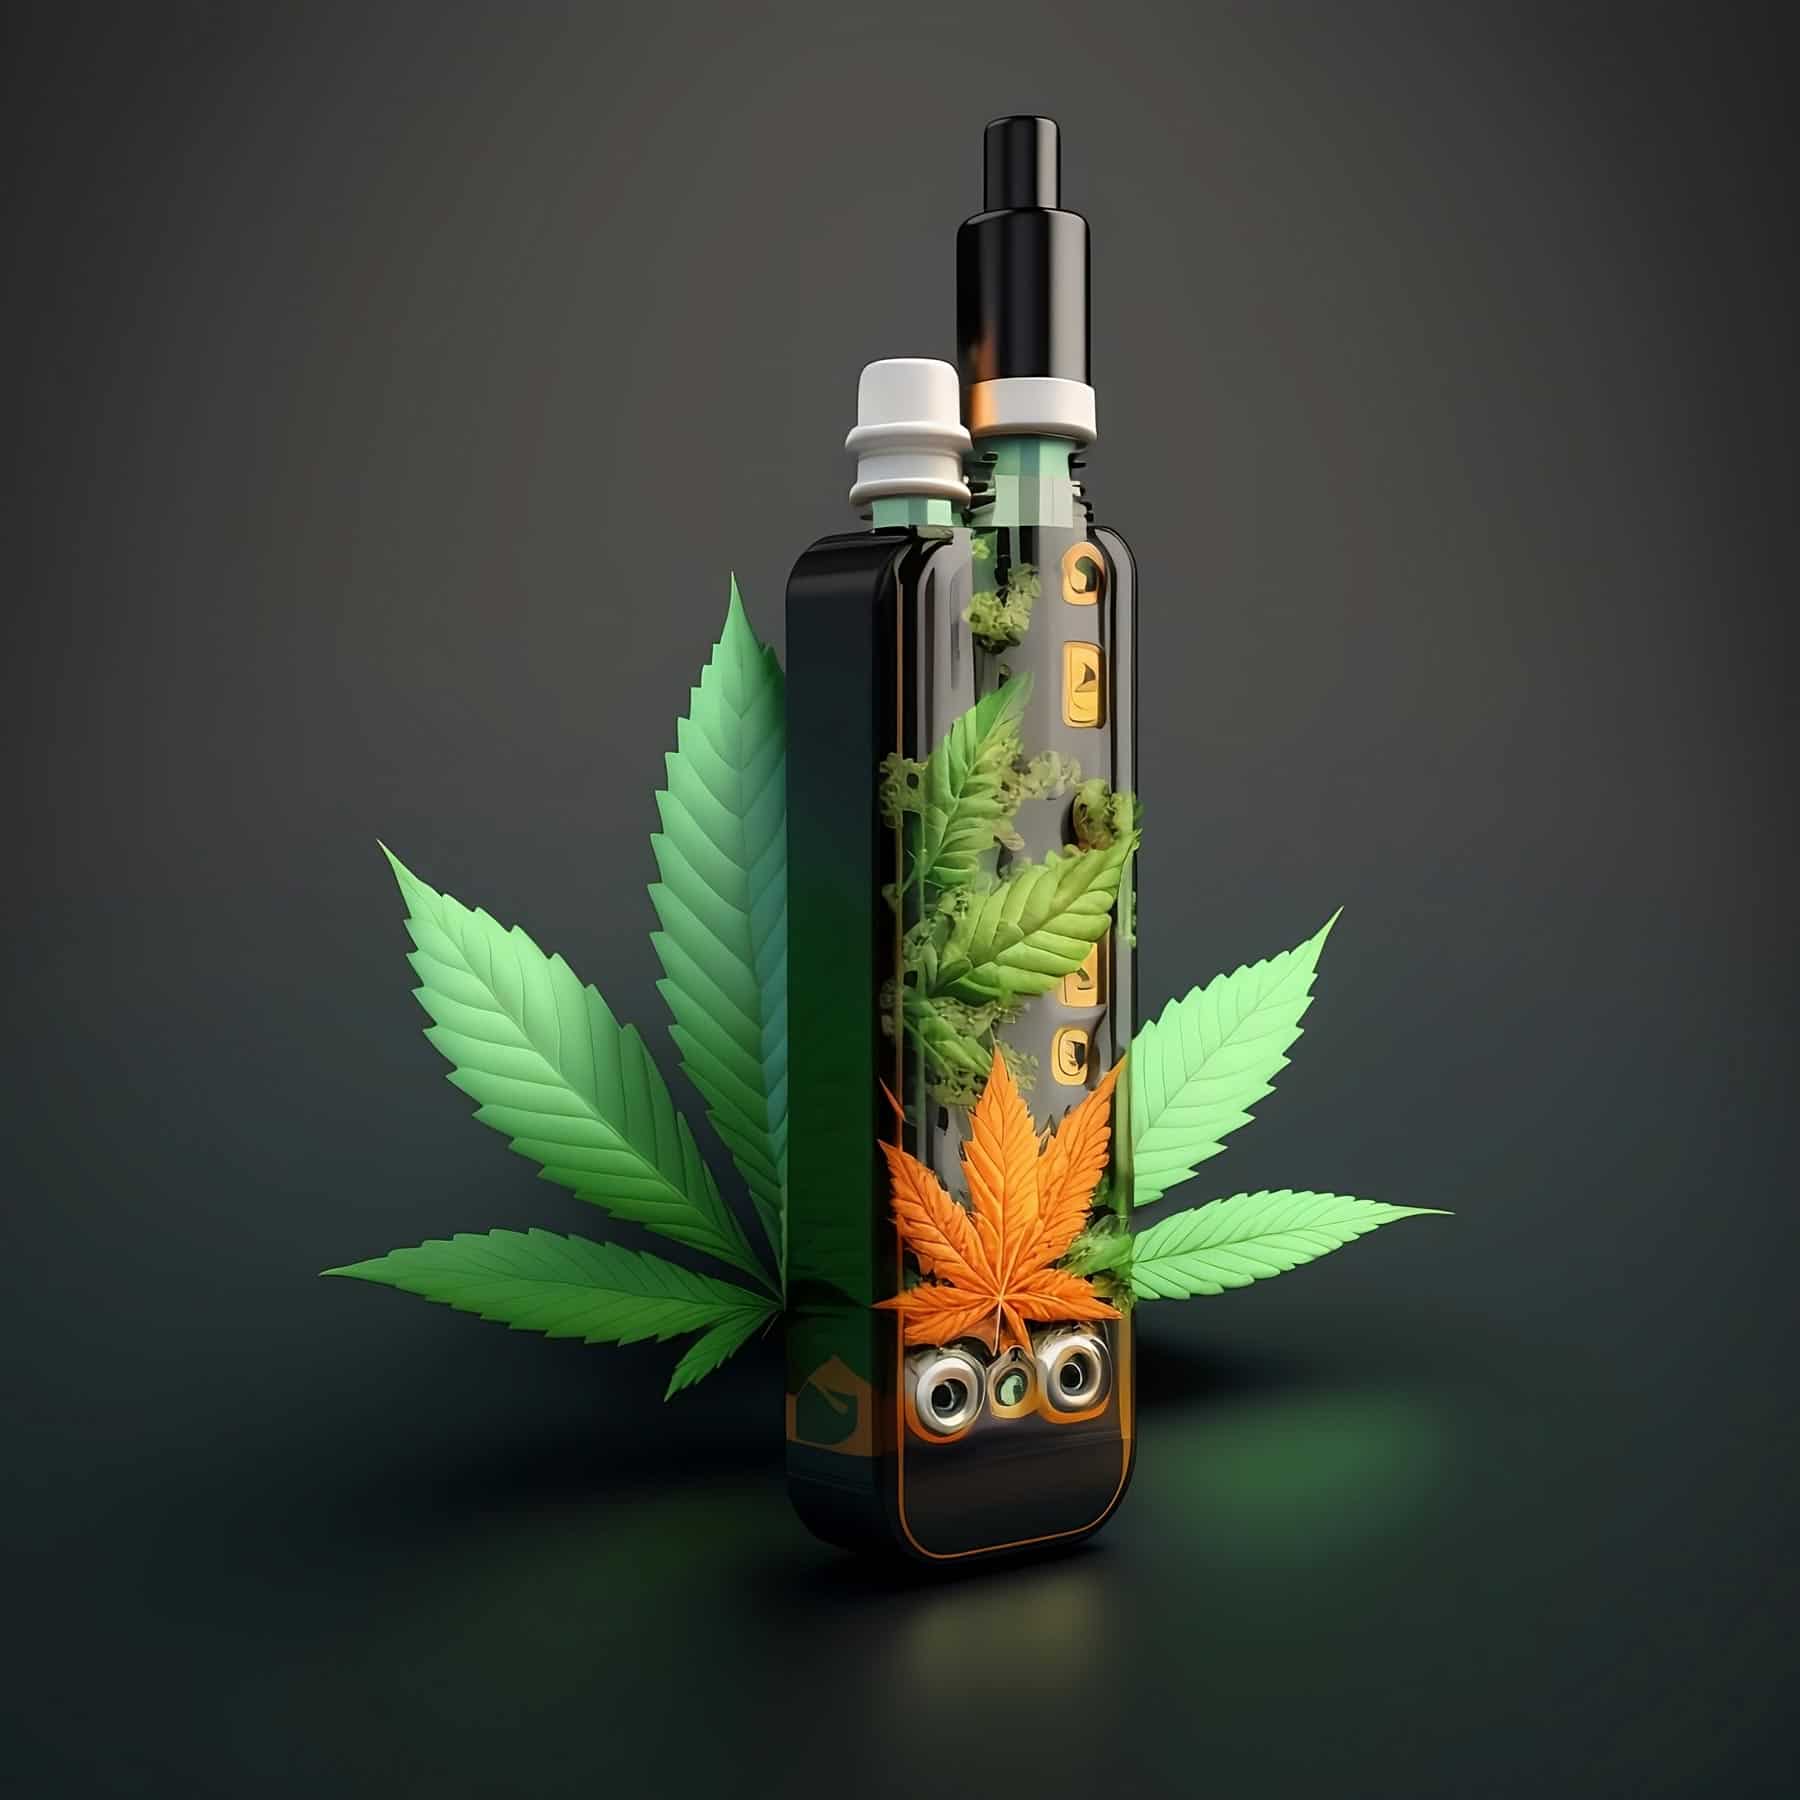 Finding the Right Delta-8 Vape for You